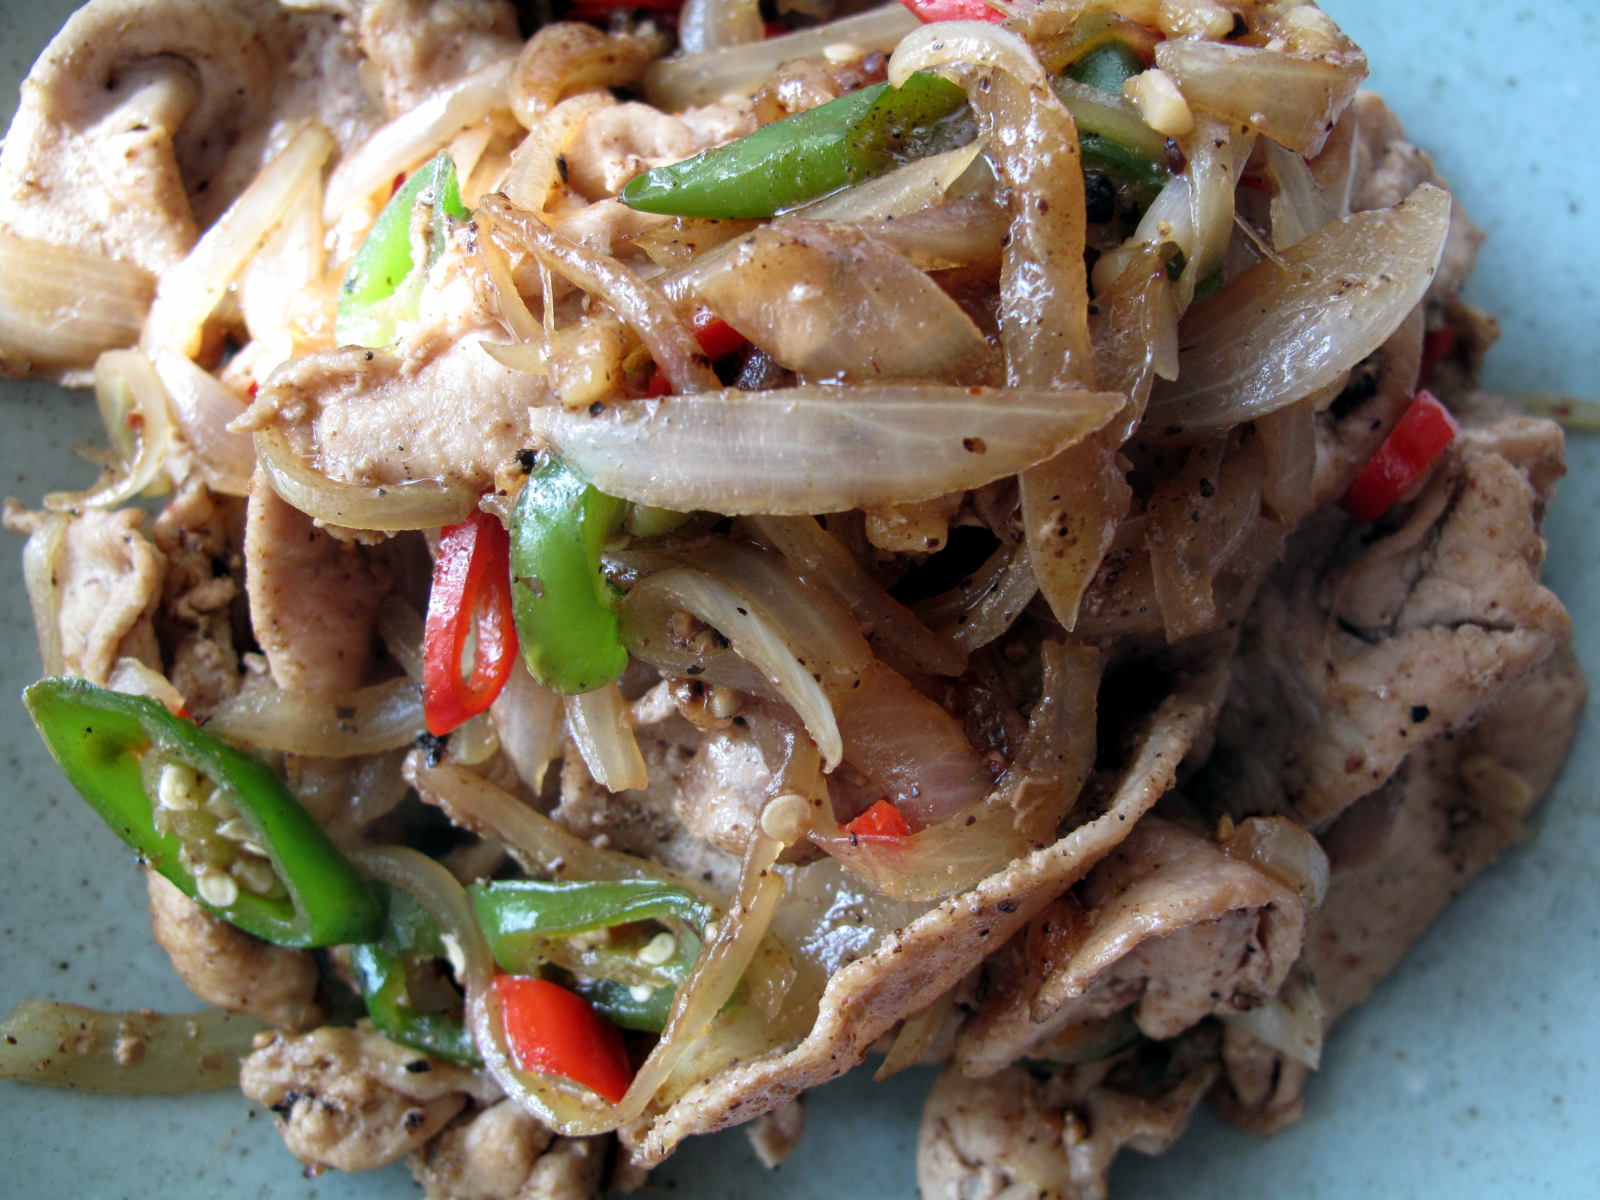 Pork or Beef Stir-fried with Chili